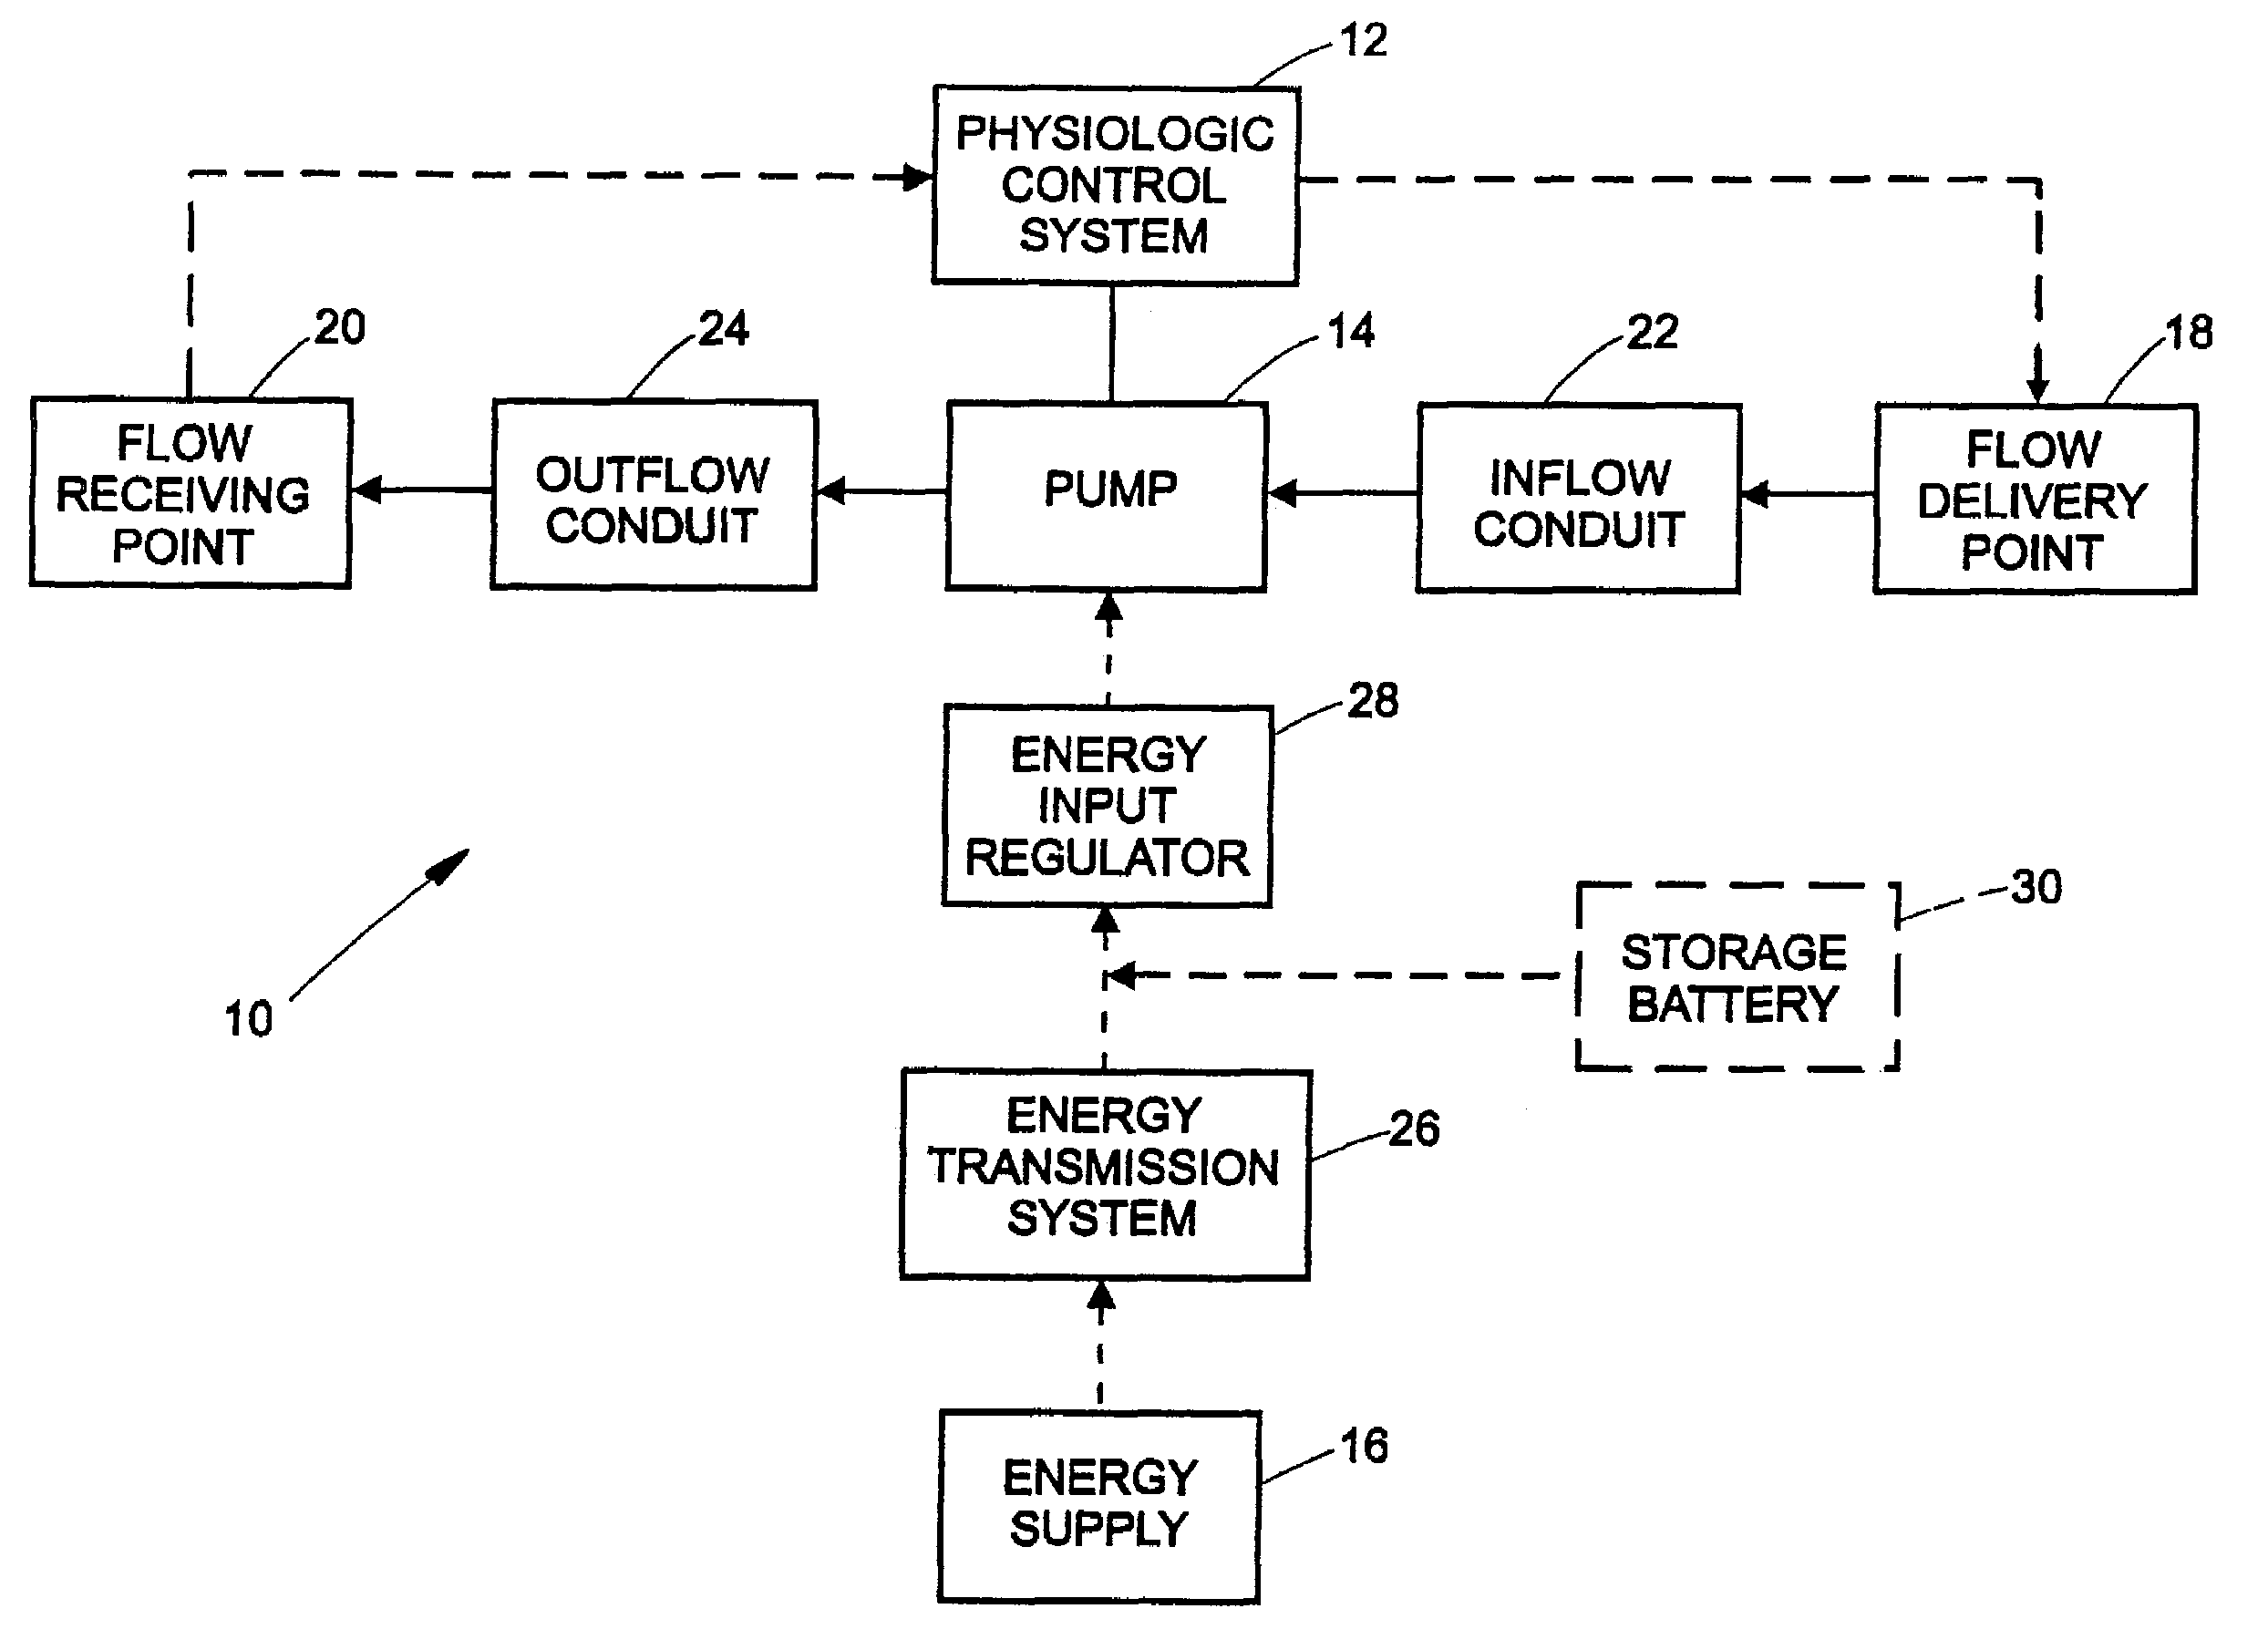 Flow controlled blood pump system